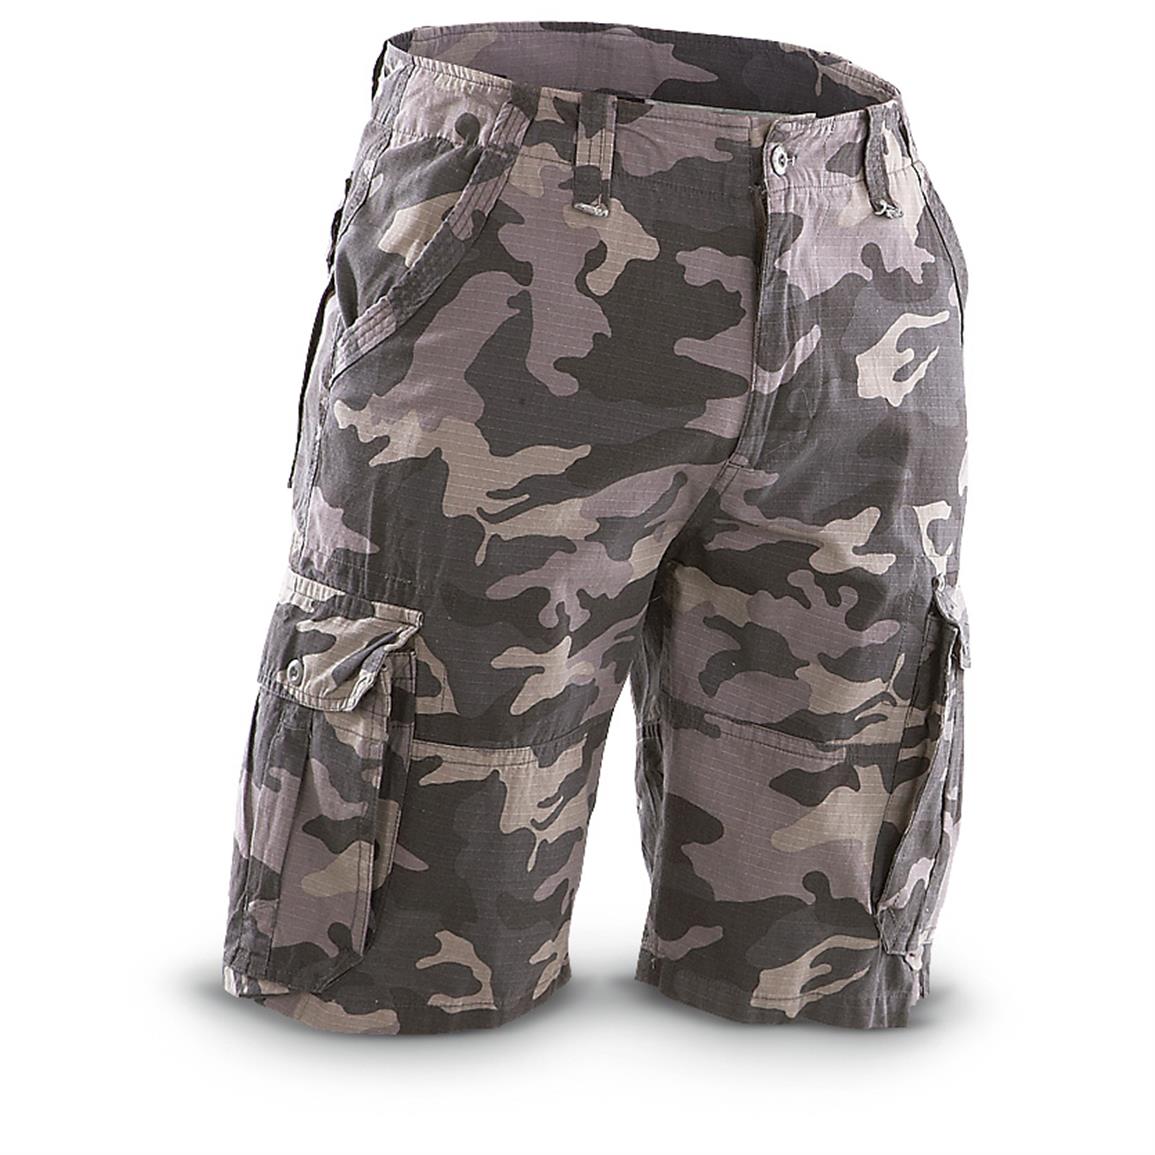 Guide Gear Camo Ripstop Shorts - 578707, Shorts at Sportsman's Guide